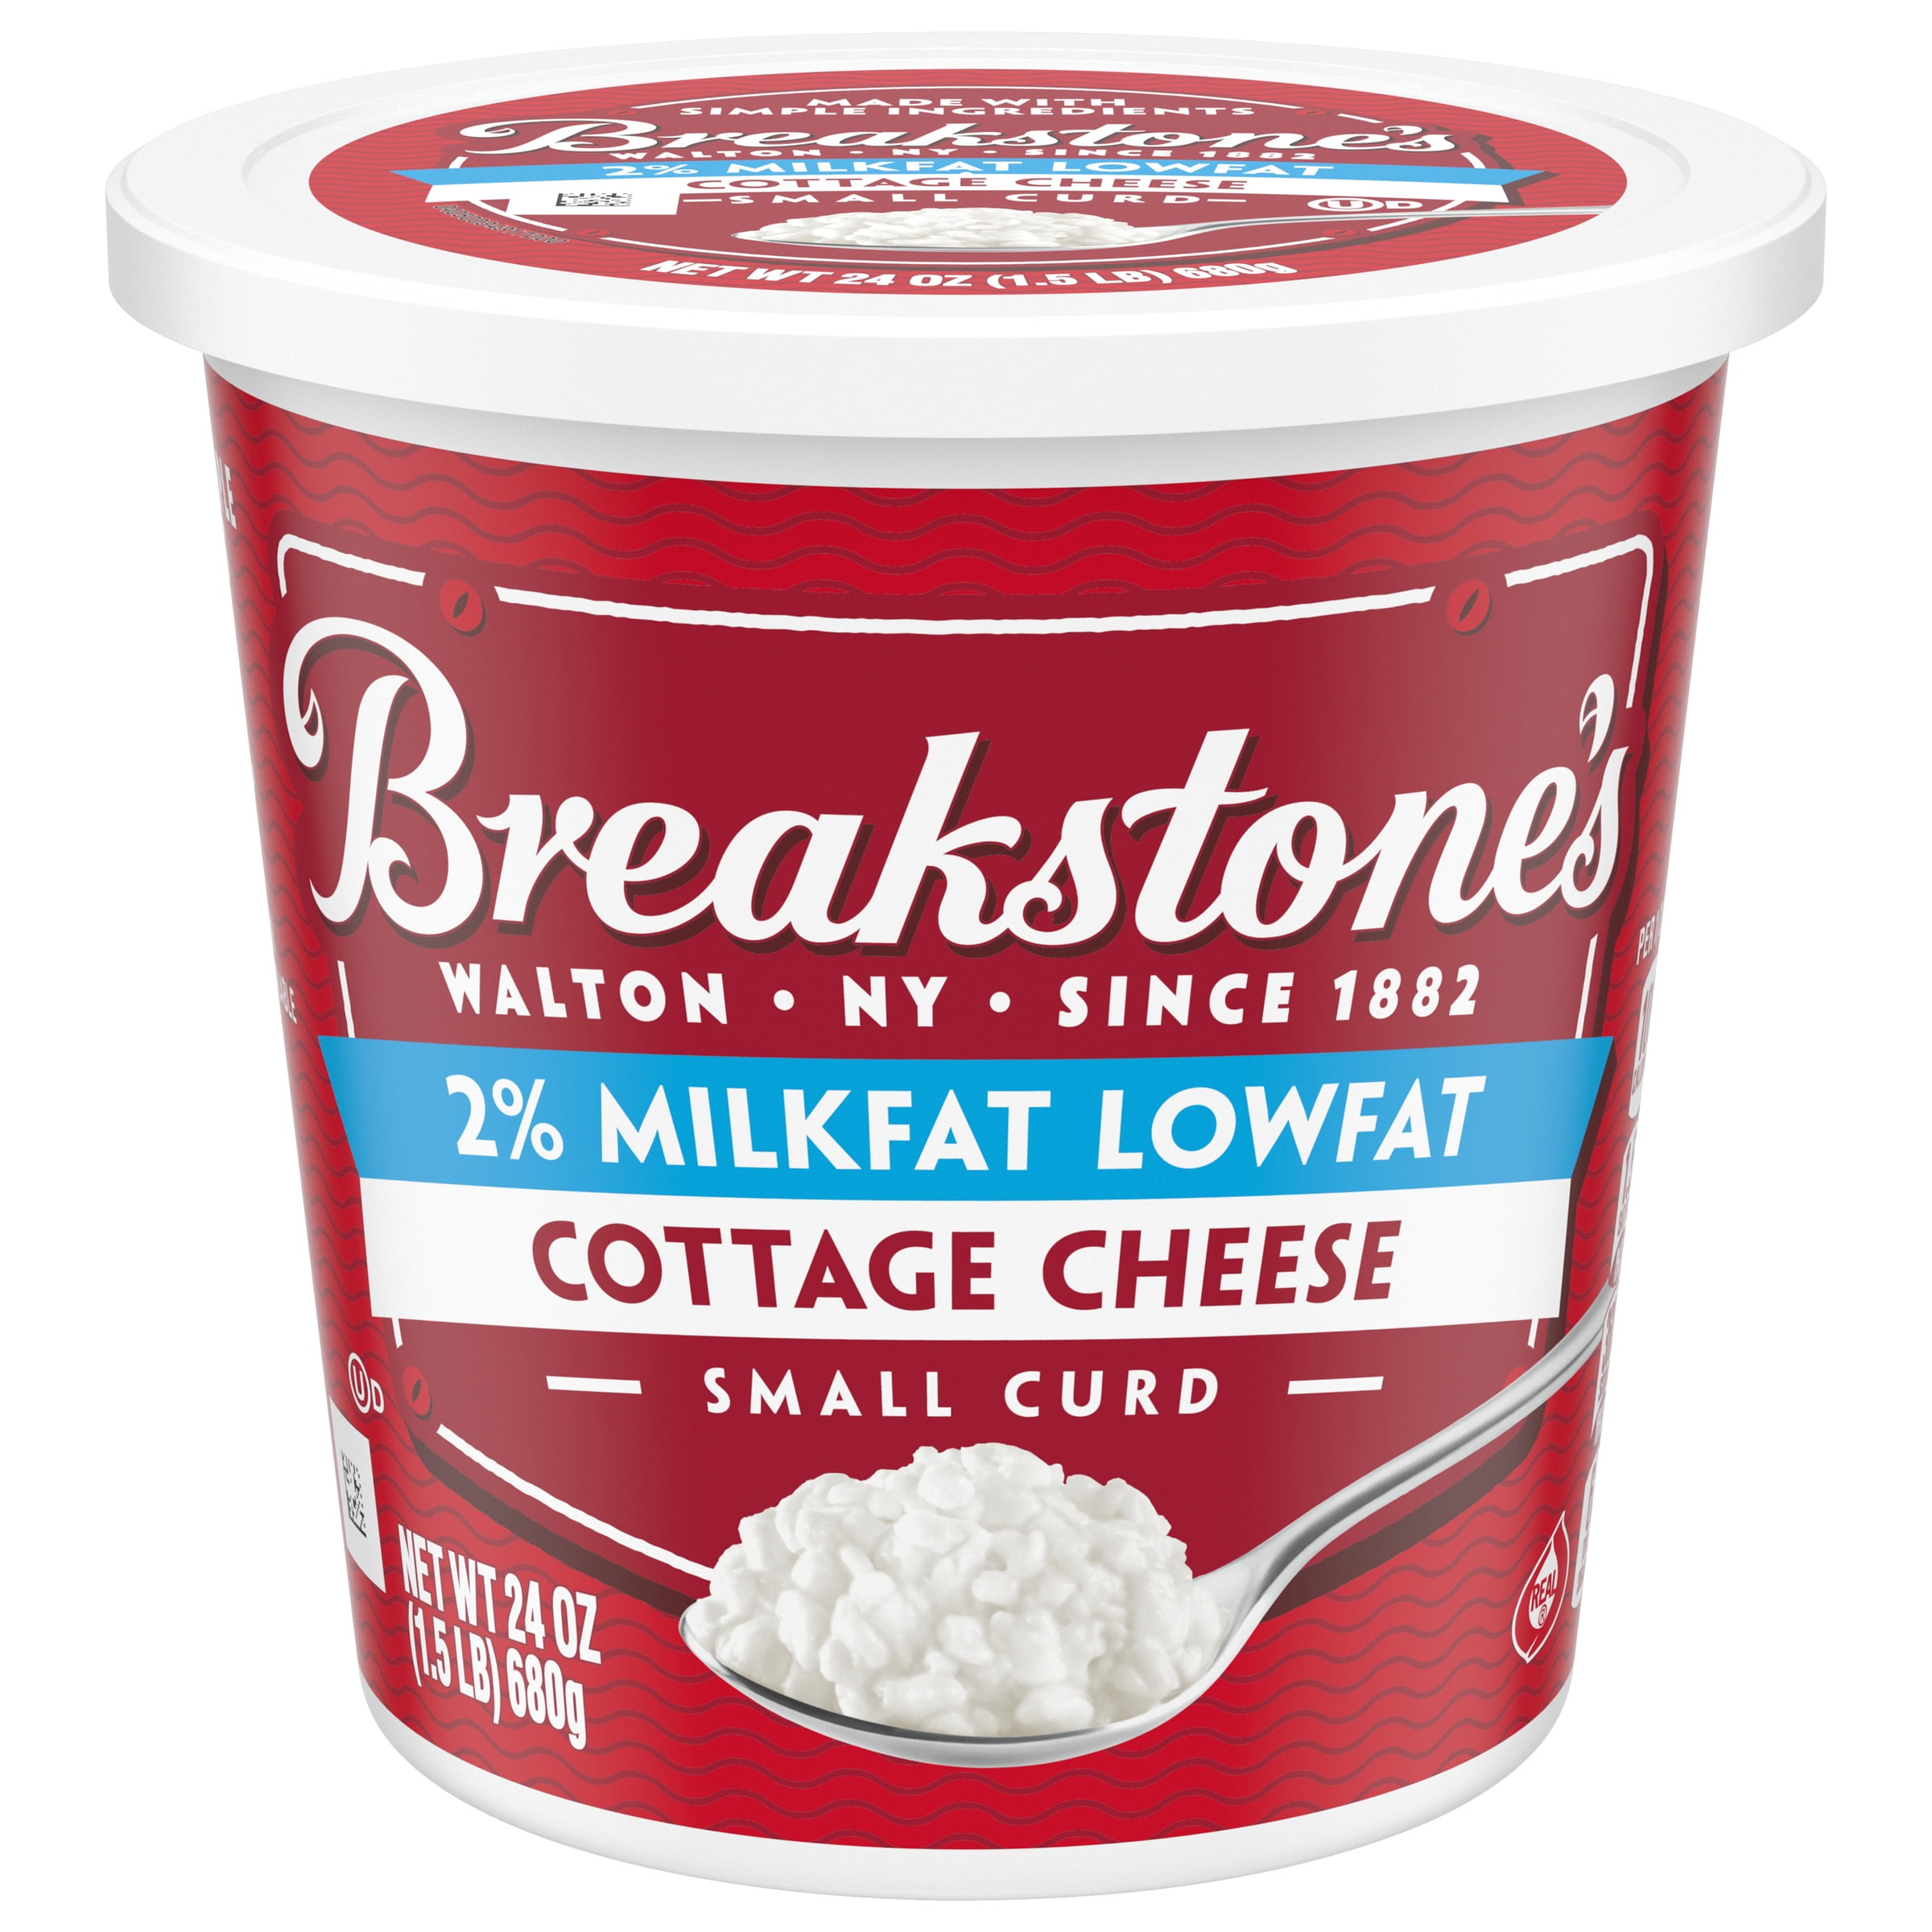 Breakstone's Lowfat Small Curd Cottage Cheese with 2% Milkfat, 24 oz Tub